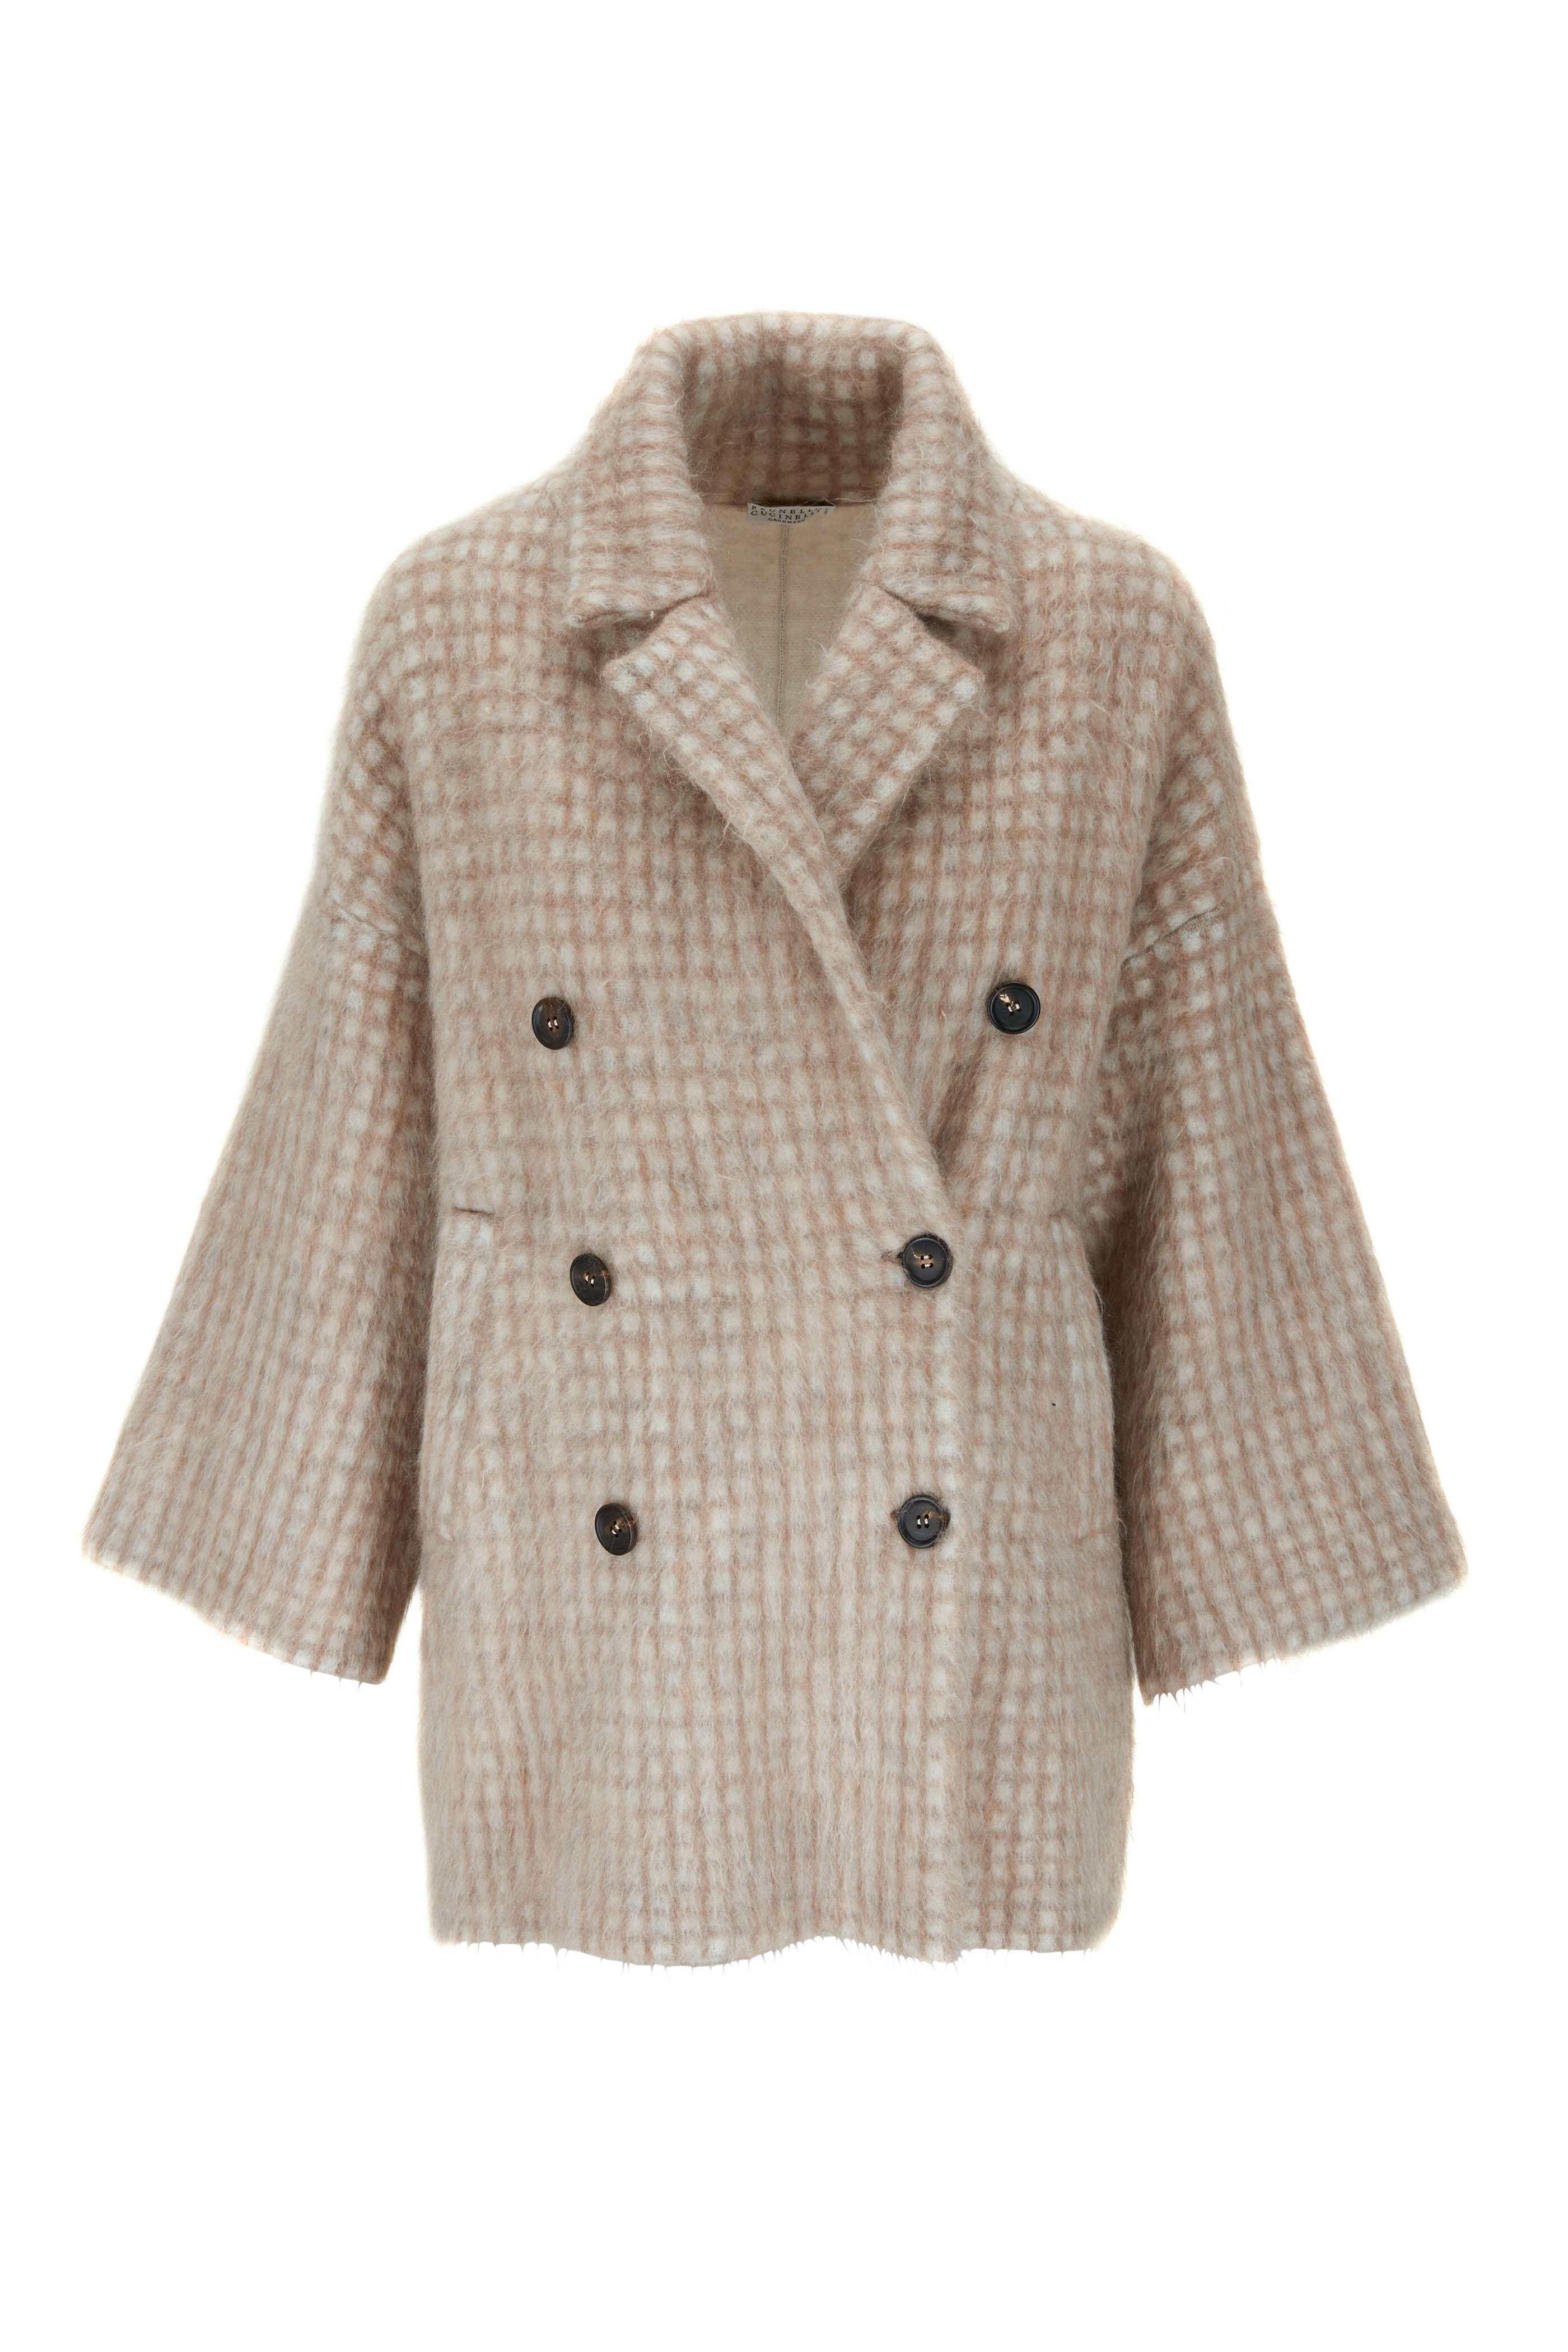 Brunello Cucinelli - Rose Brushed Wool Mohair Printed Peacoat